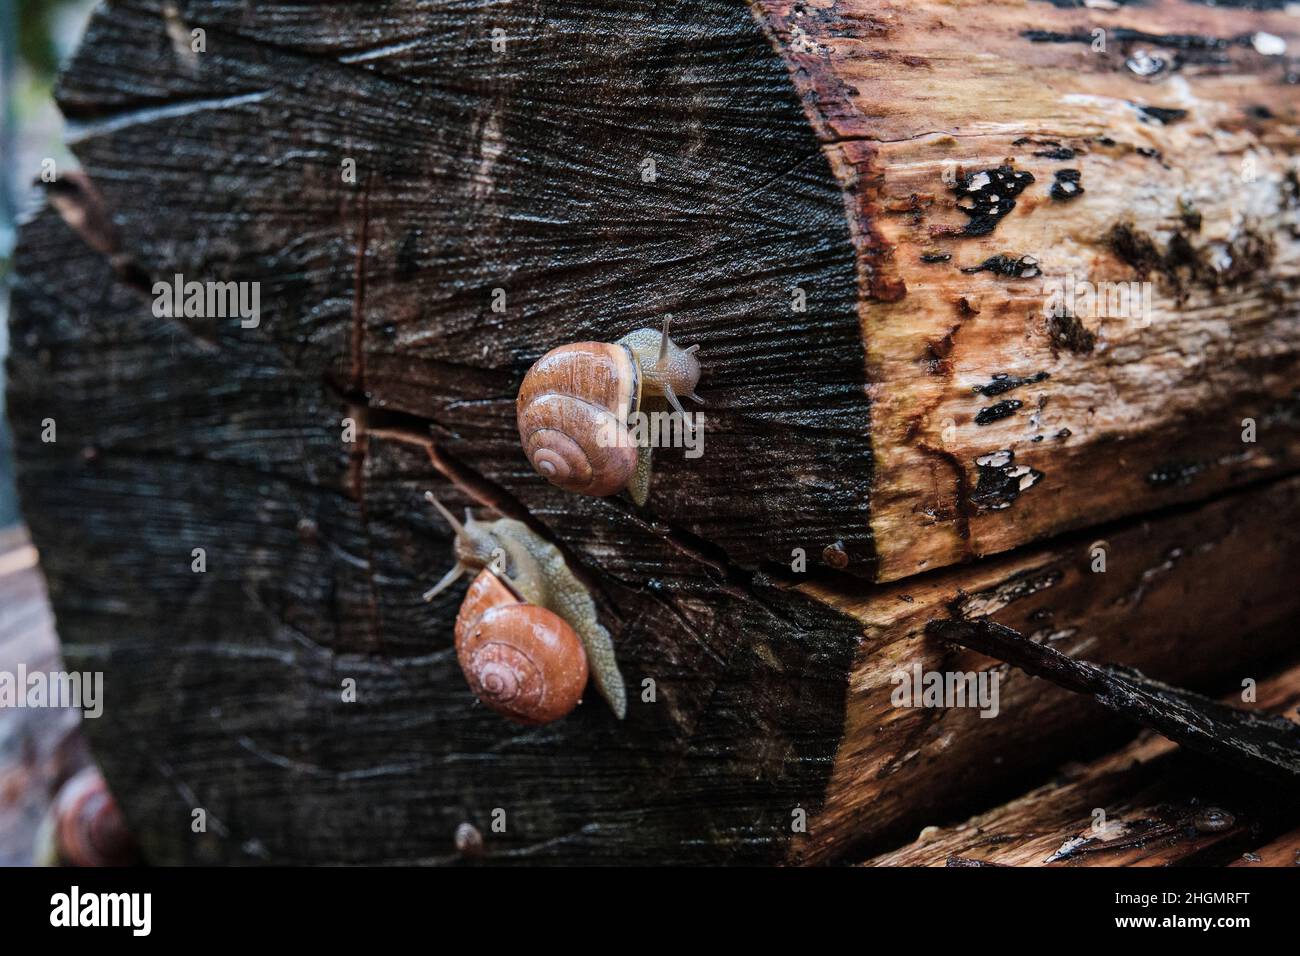 small and slimy garden snails crawling on an old piece of wood at a very slow pace Stock Photo